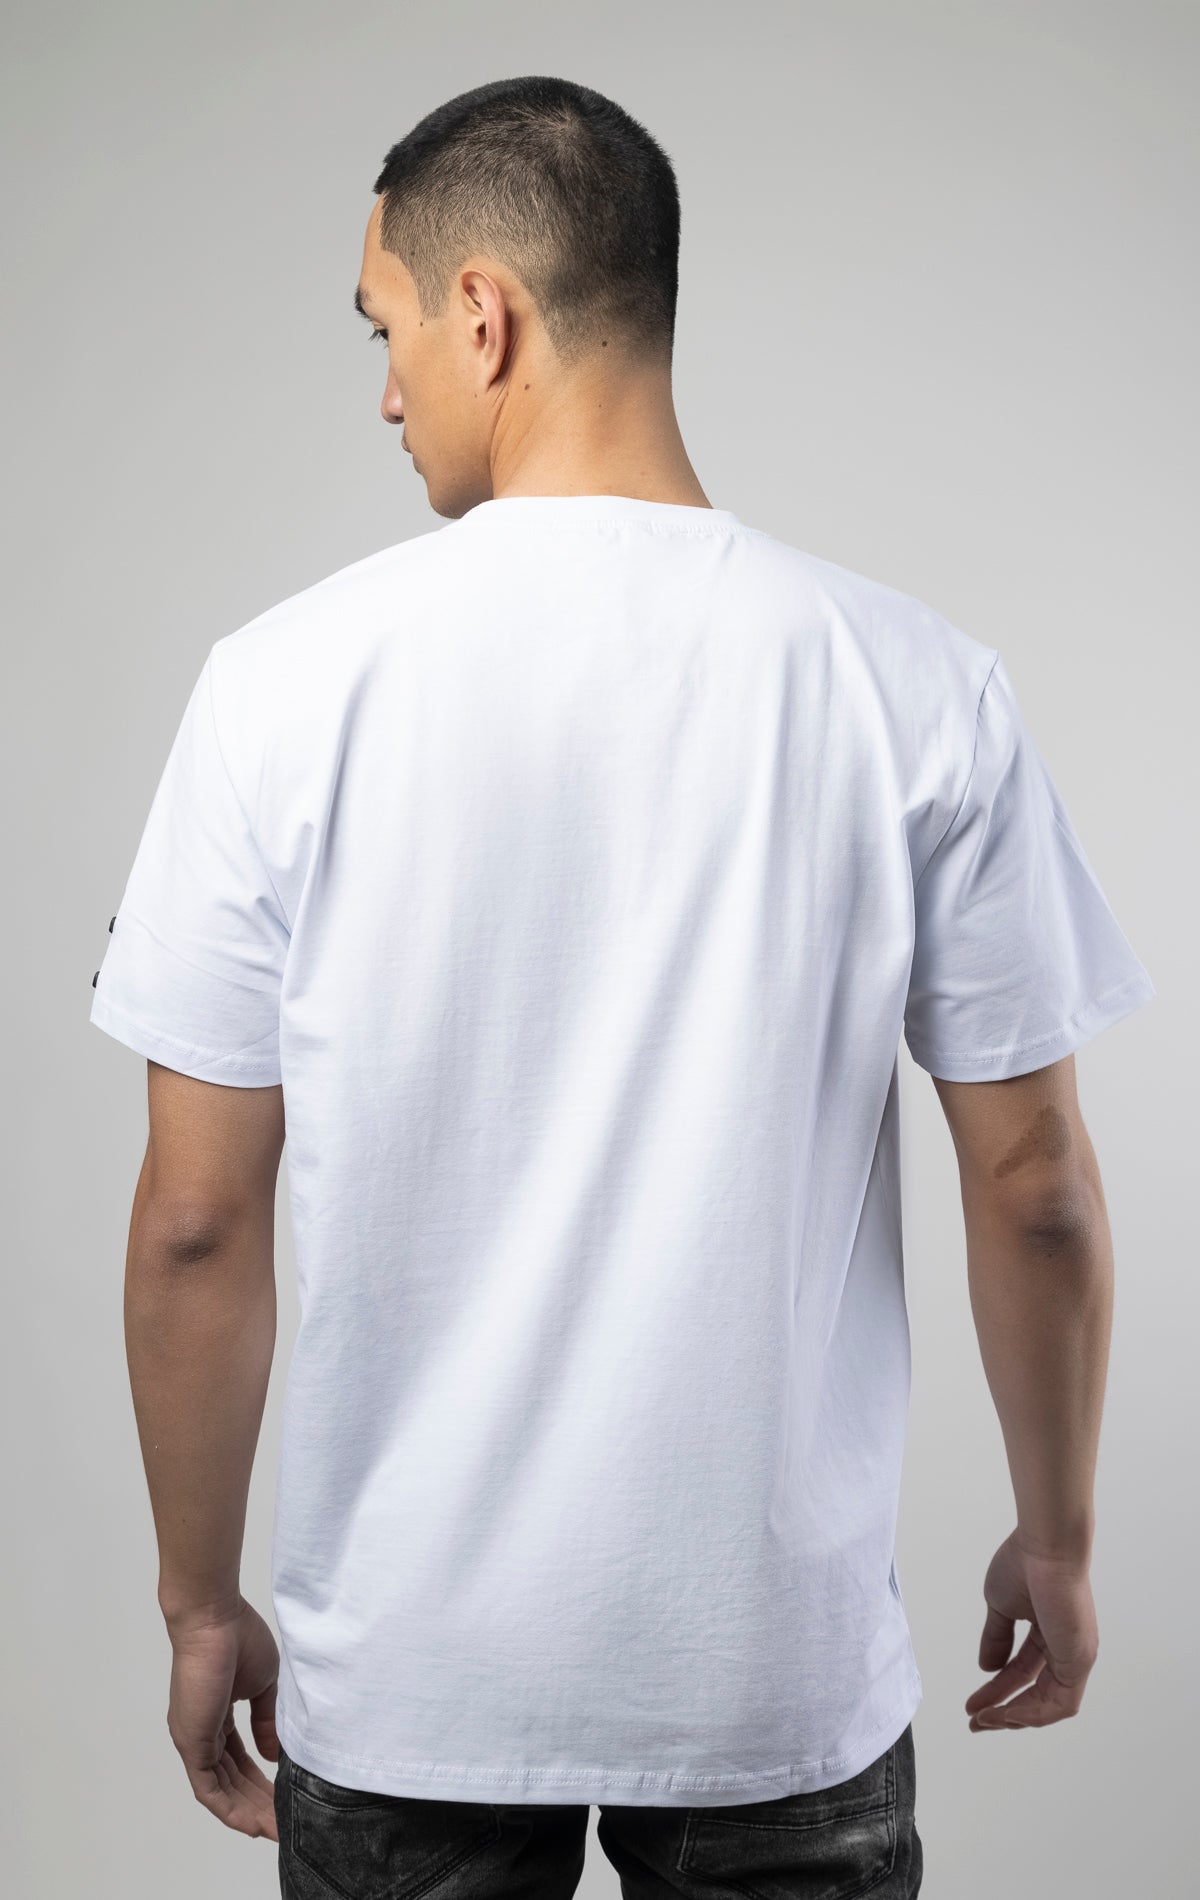 White crewneck, short sleeve t-shirt with graphic print on front. Made of 100% cotton.